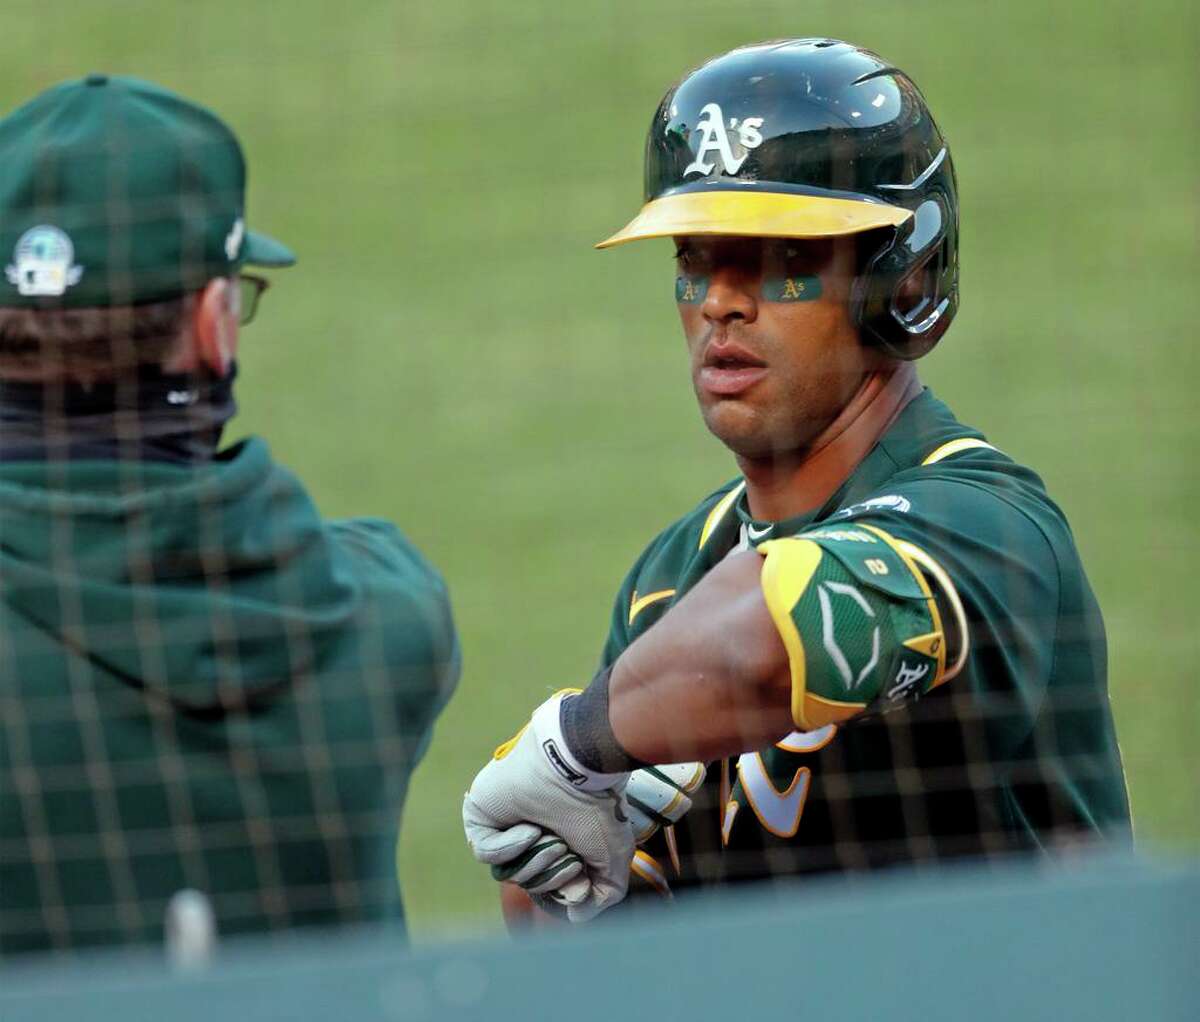 Oakland Athletics' Khris Davis returns to dugout after hitting RBI sacrifice fly in 4th inning against San Francisco Giants during exhibition game at Oakland Coliseum in Oakland, Calif., on Monday, July 20, 2020.